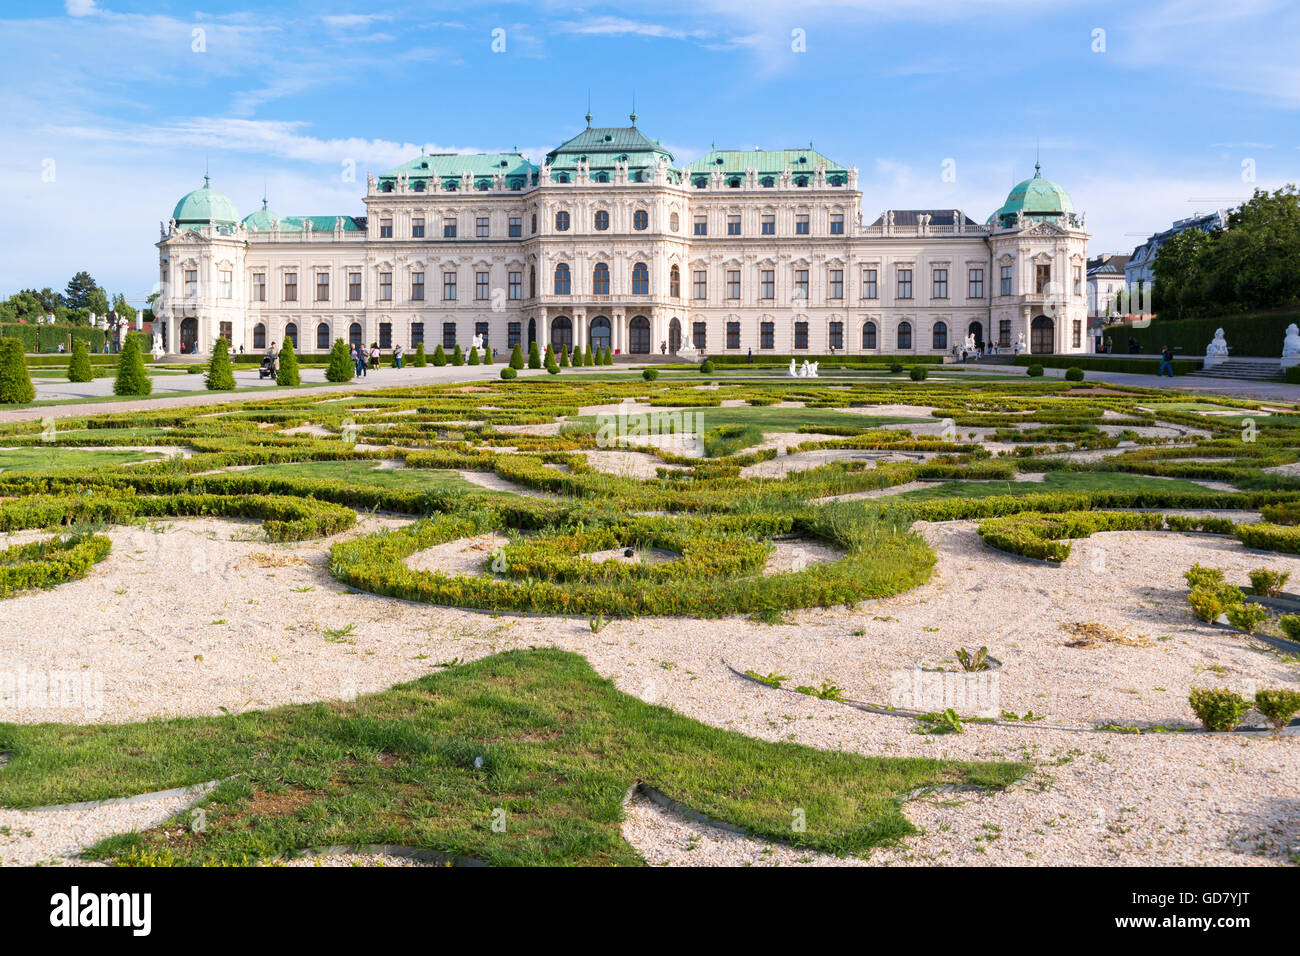 Belvedere gardens with people and Upper Belvedere Palace in Vienna, Austria Stock Photo